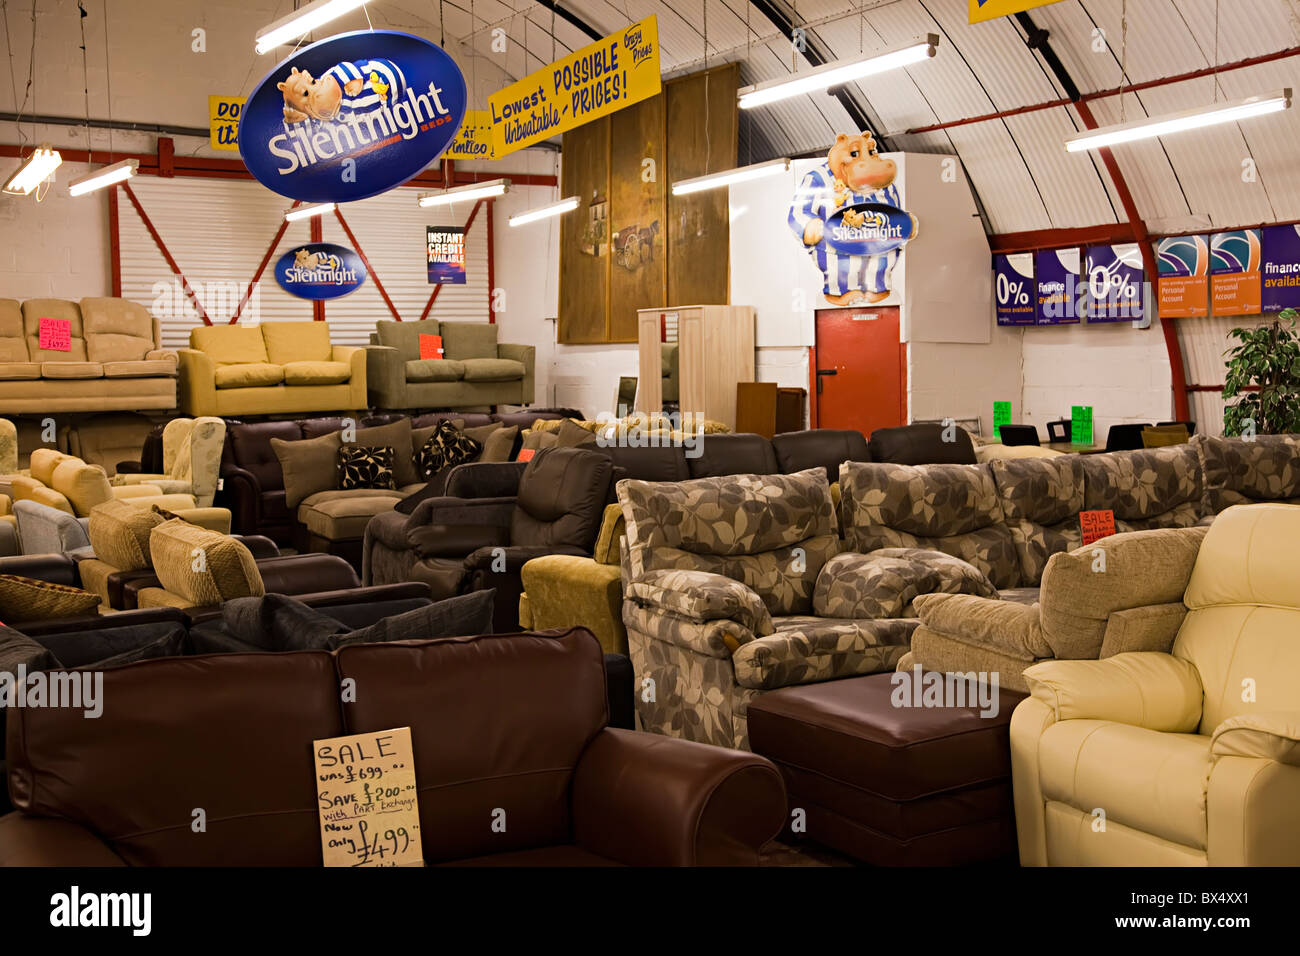 Sofas furniture on sale in warehouse Wales UK Stock Photo - Alamy